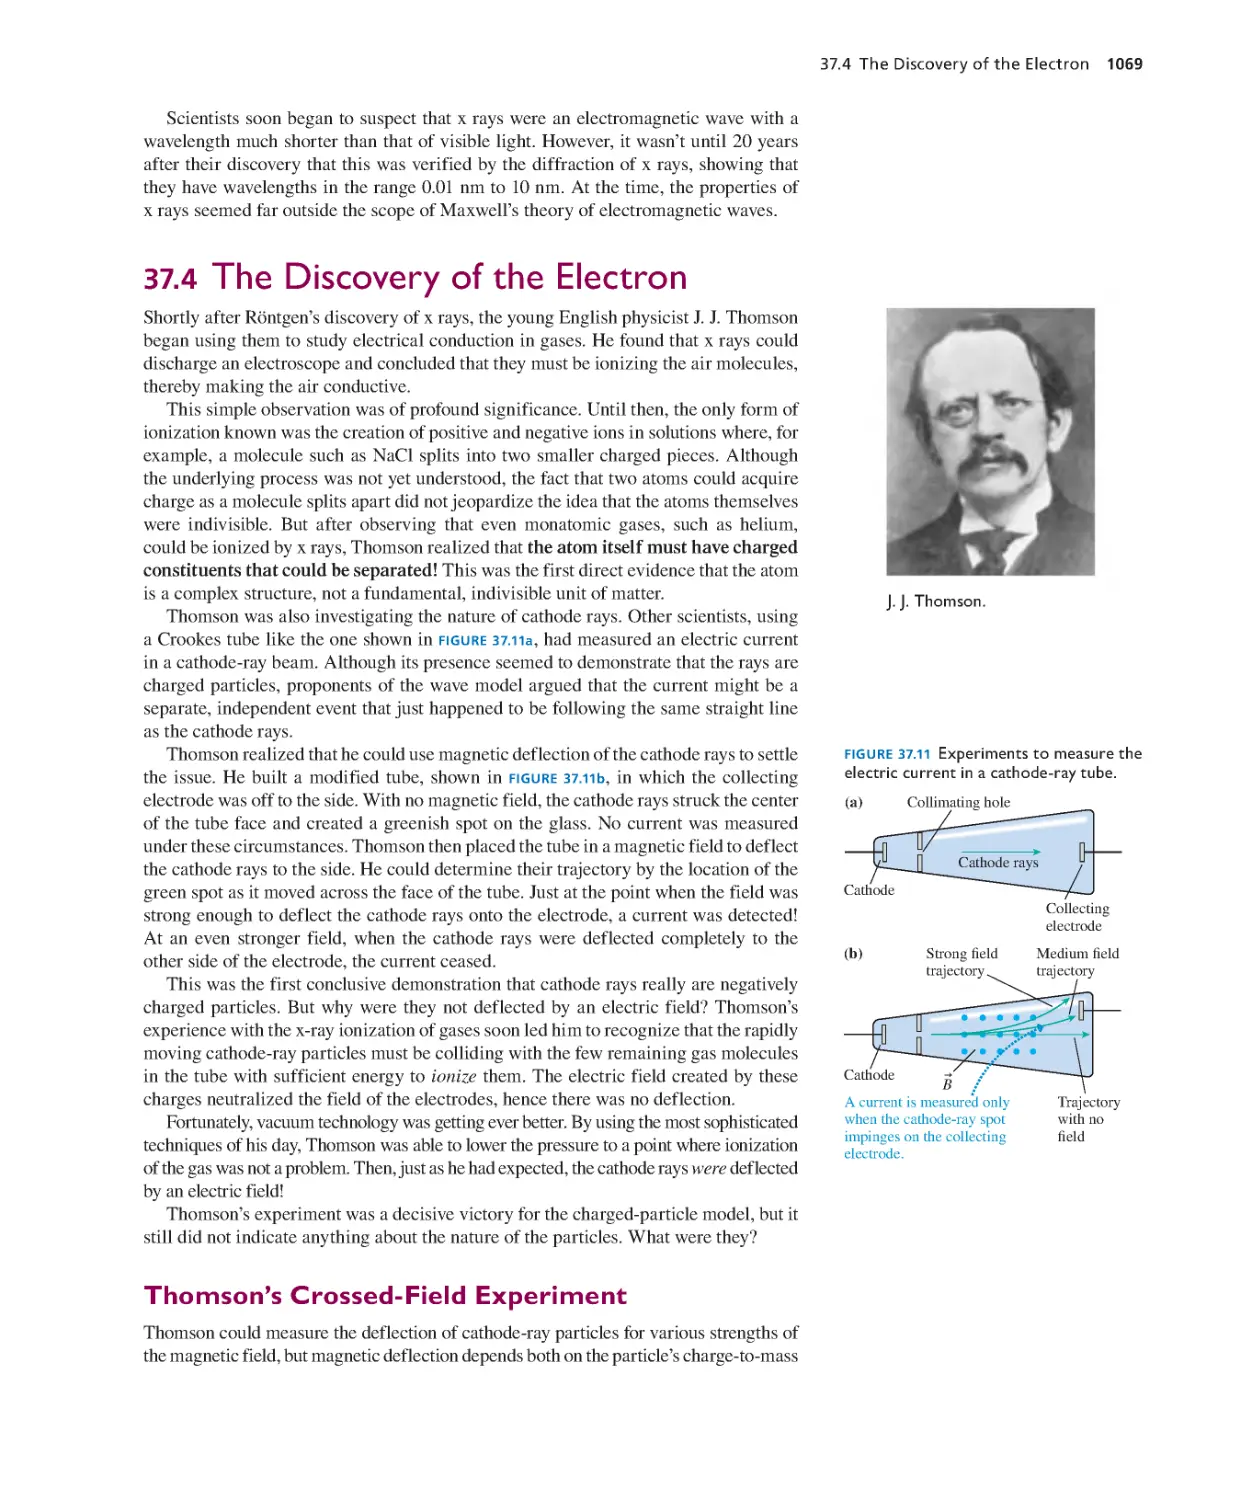 37.4. The Discovery of the Electron